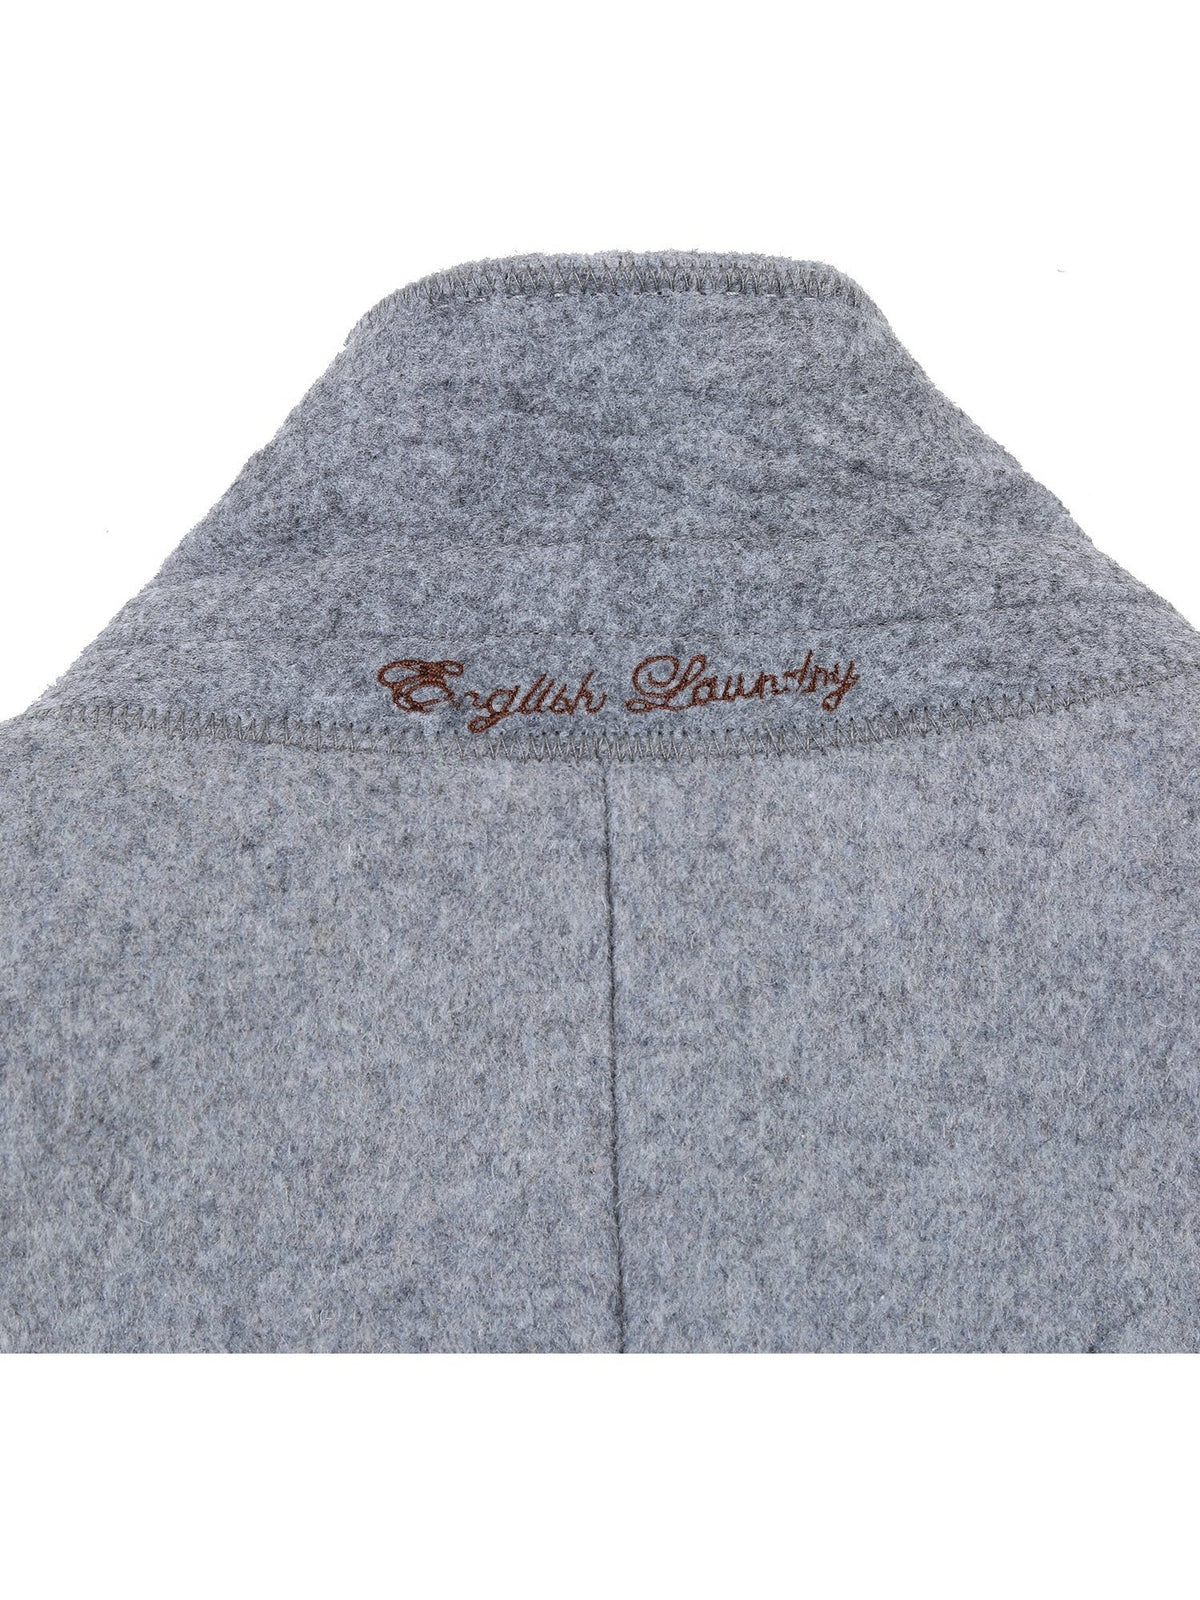 English Laundry Wool Blend Breasted Light Grey Top Coat